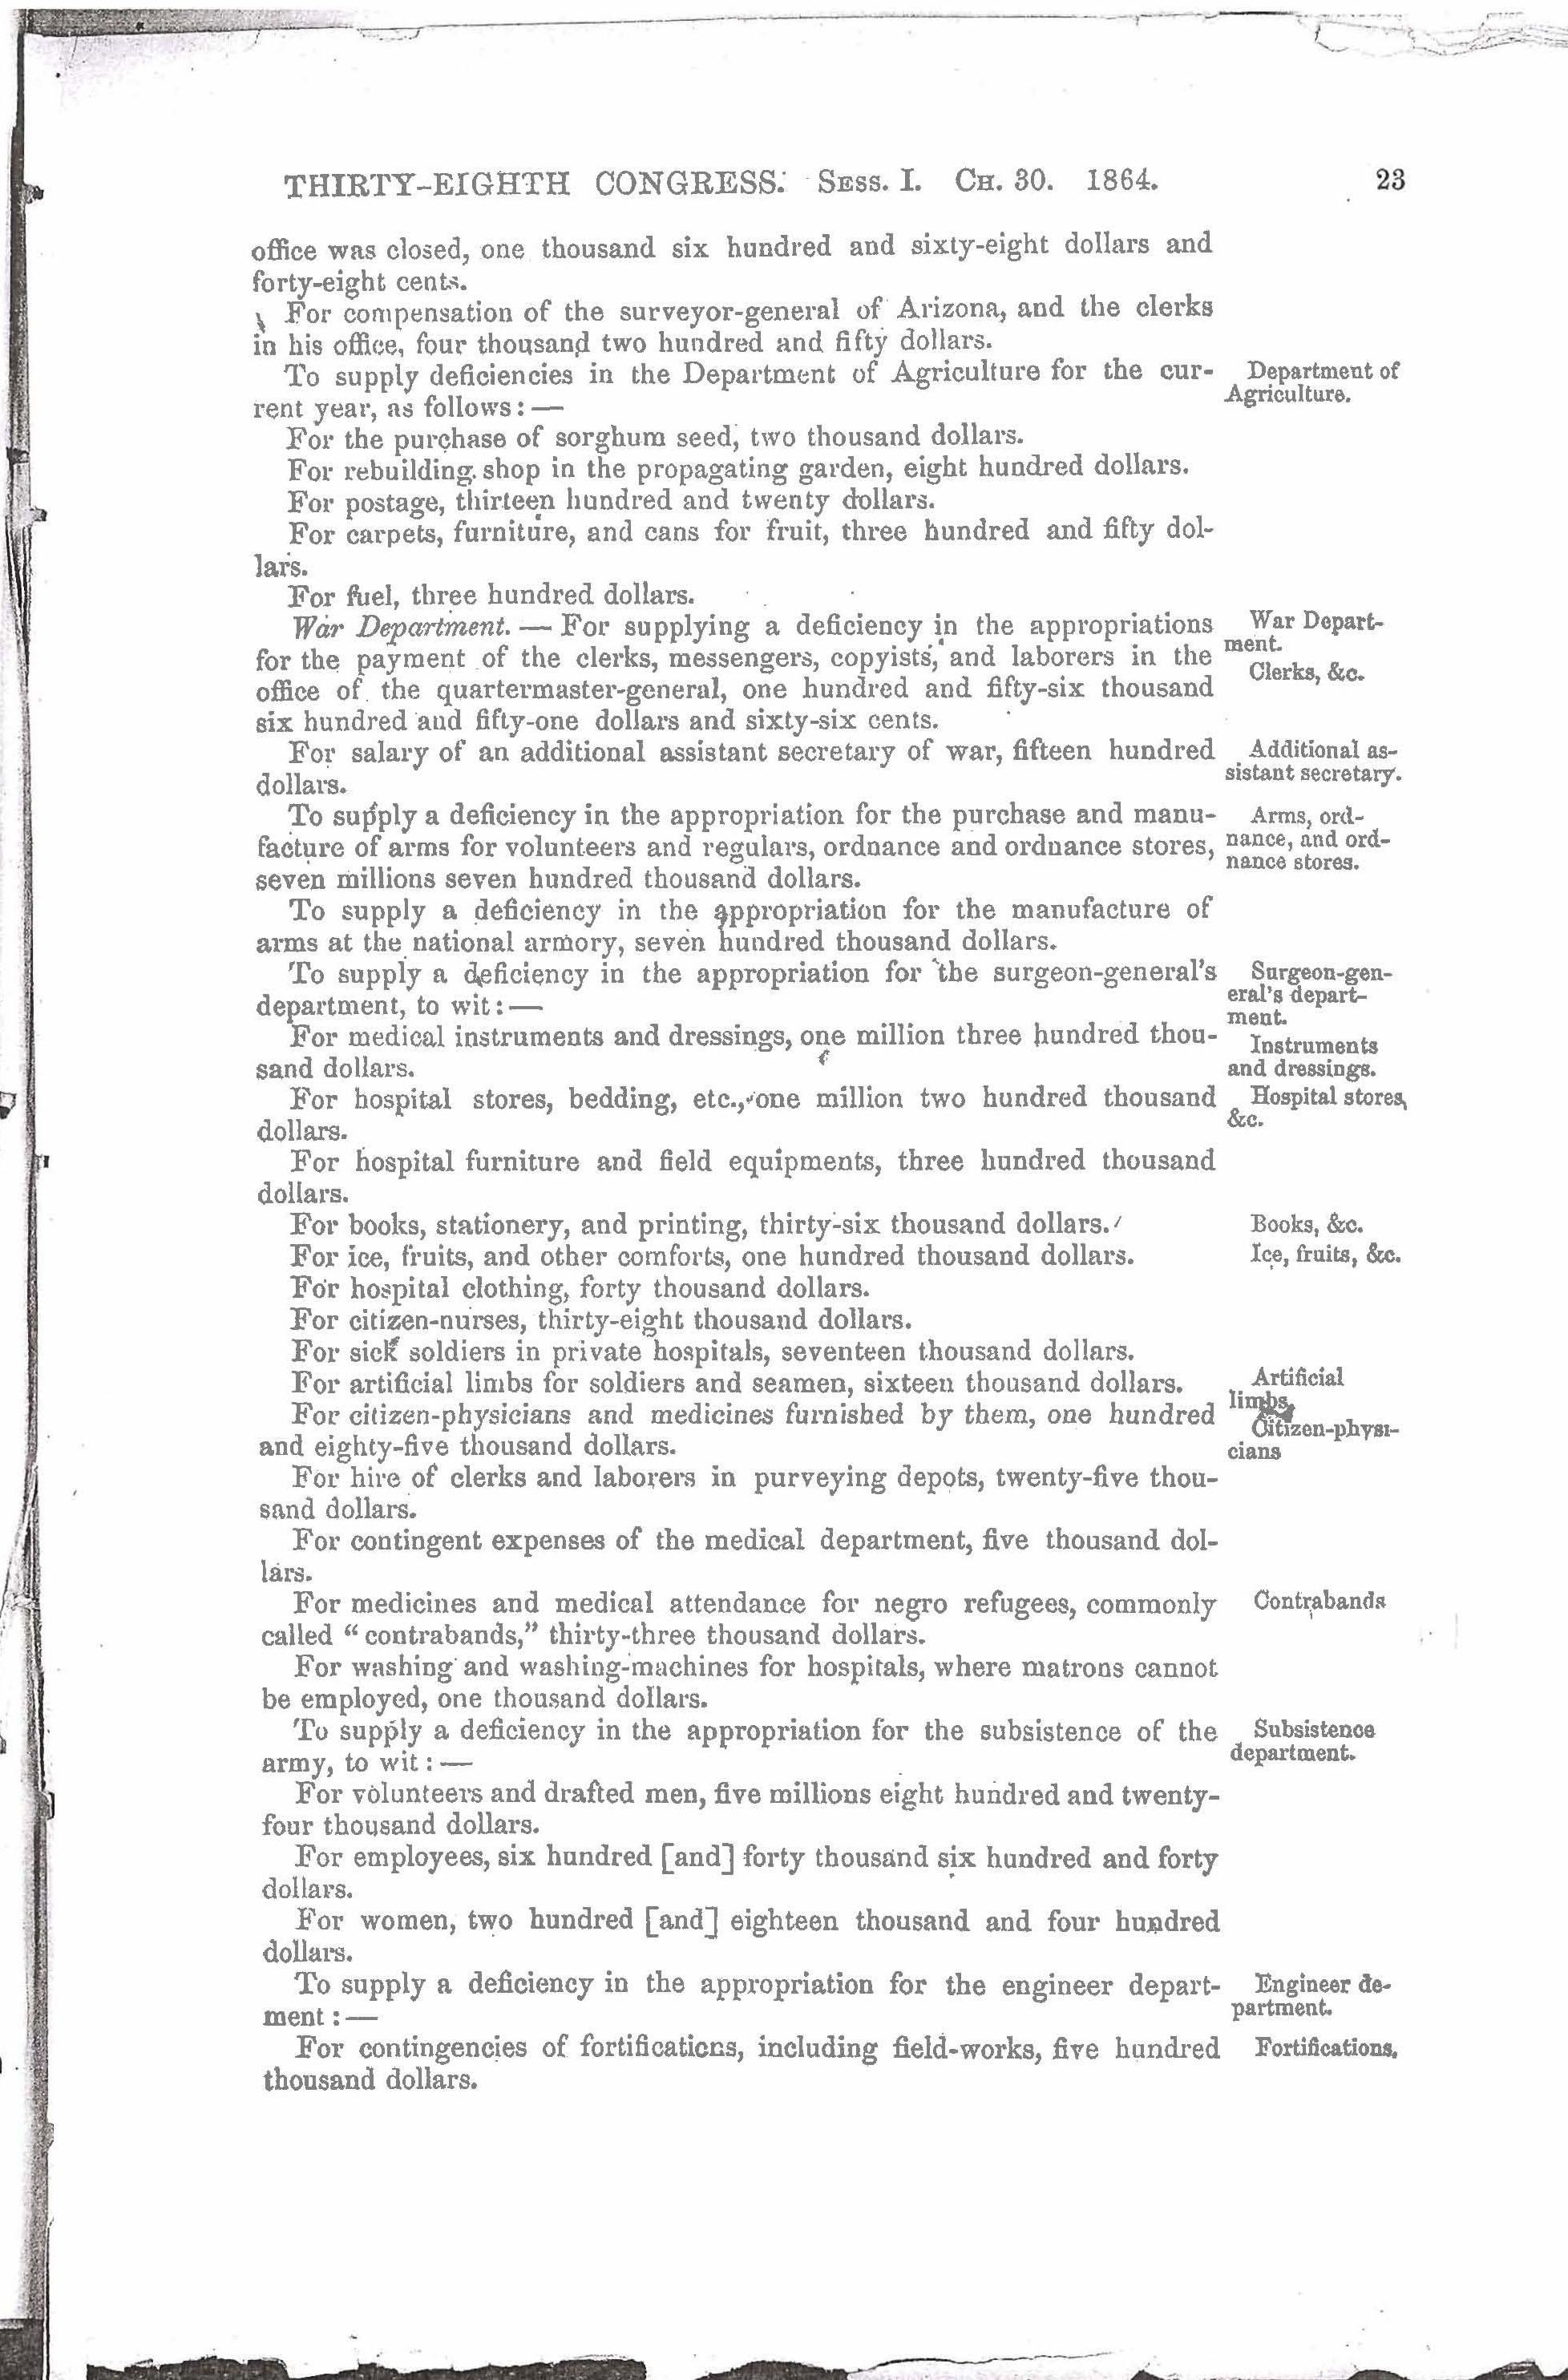 Act of Congress Authorizing Construction of the Washington Naval  Hospital, Page 2 of 7